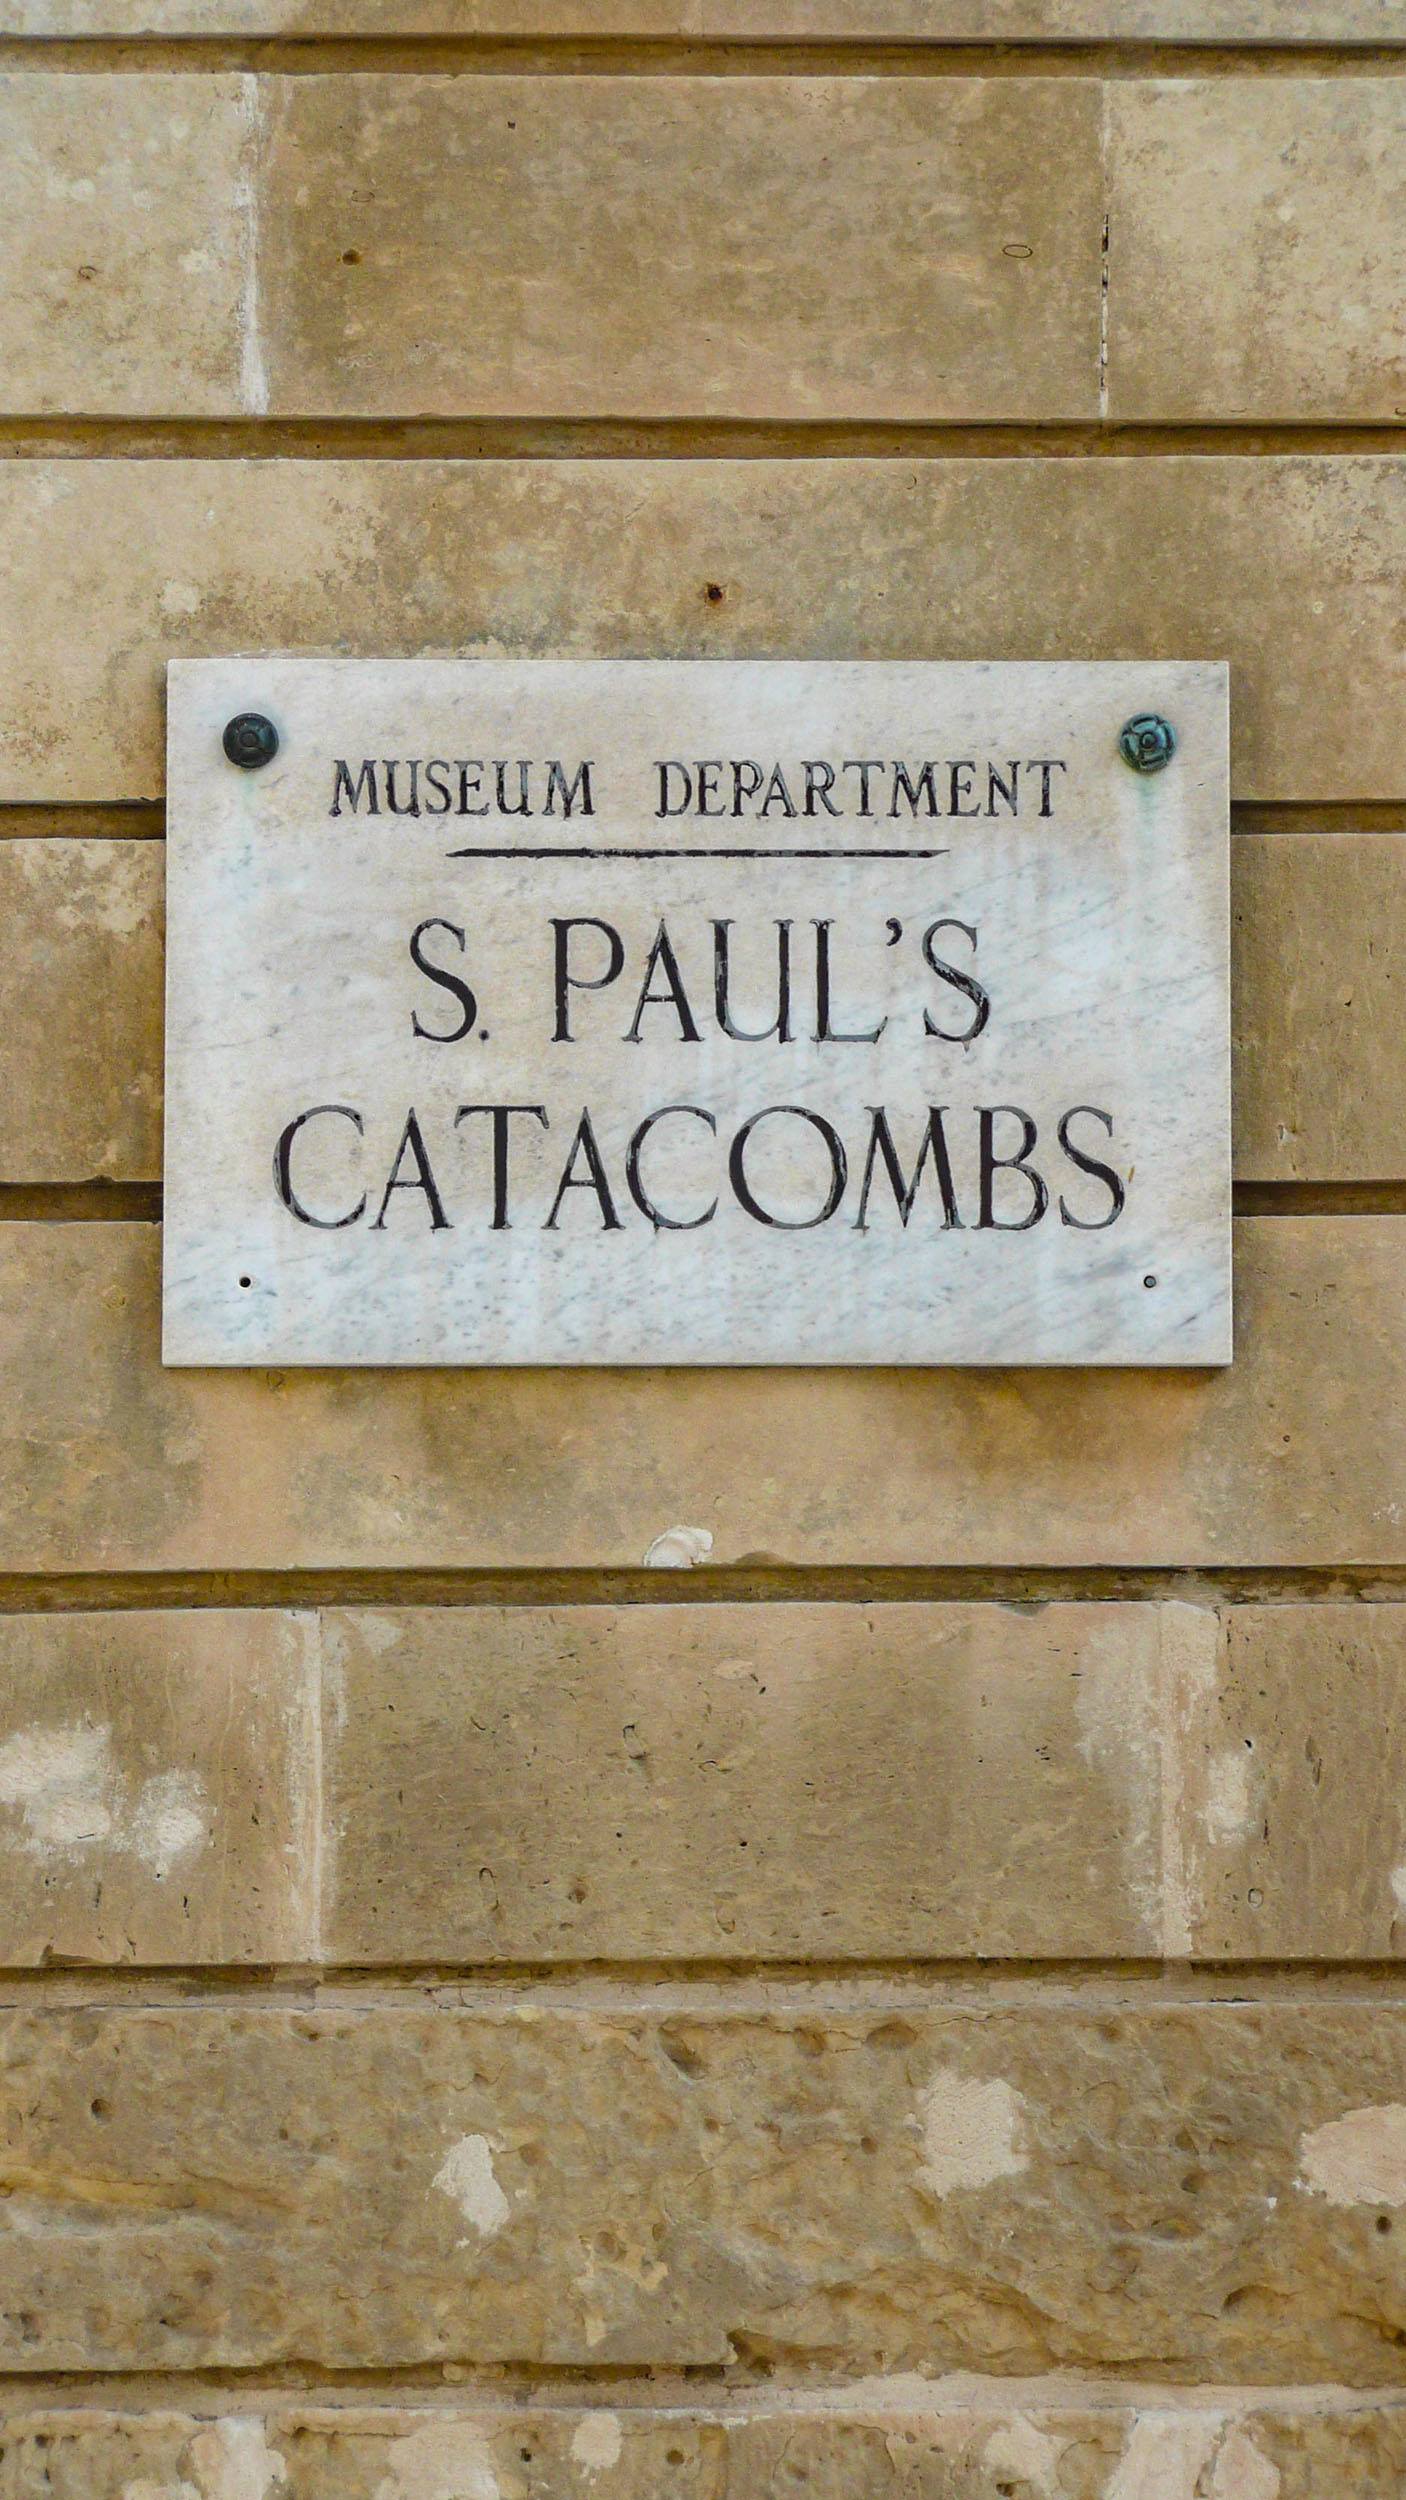 Entrance to St Paul's Catacombs in Malta